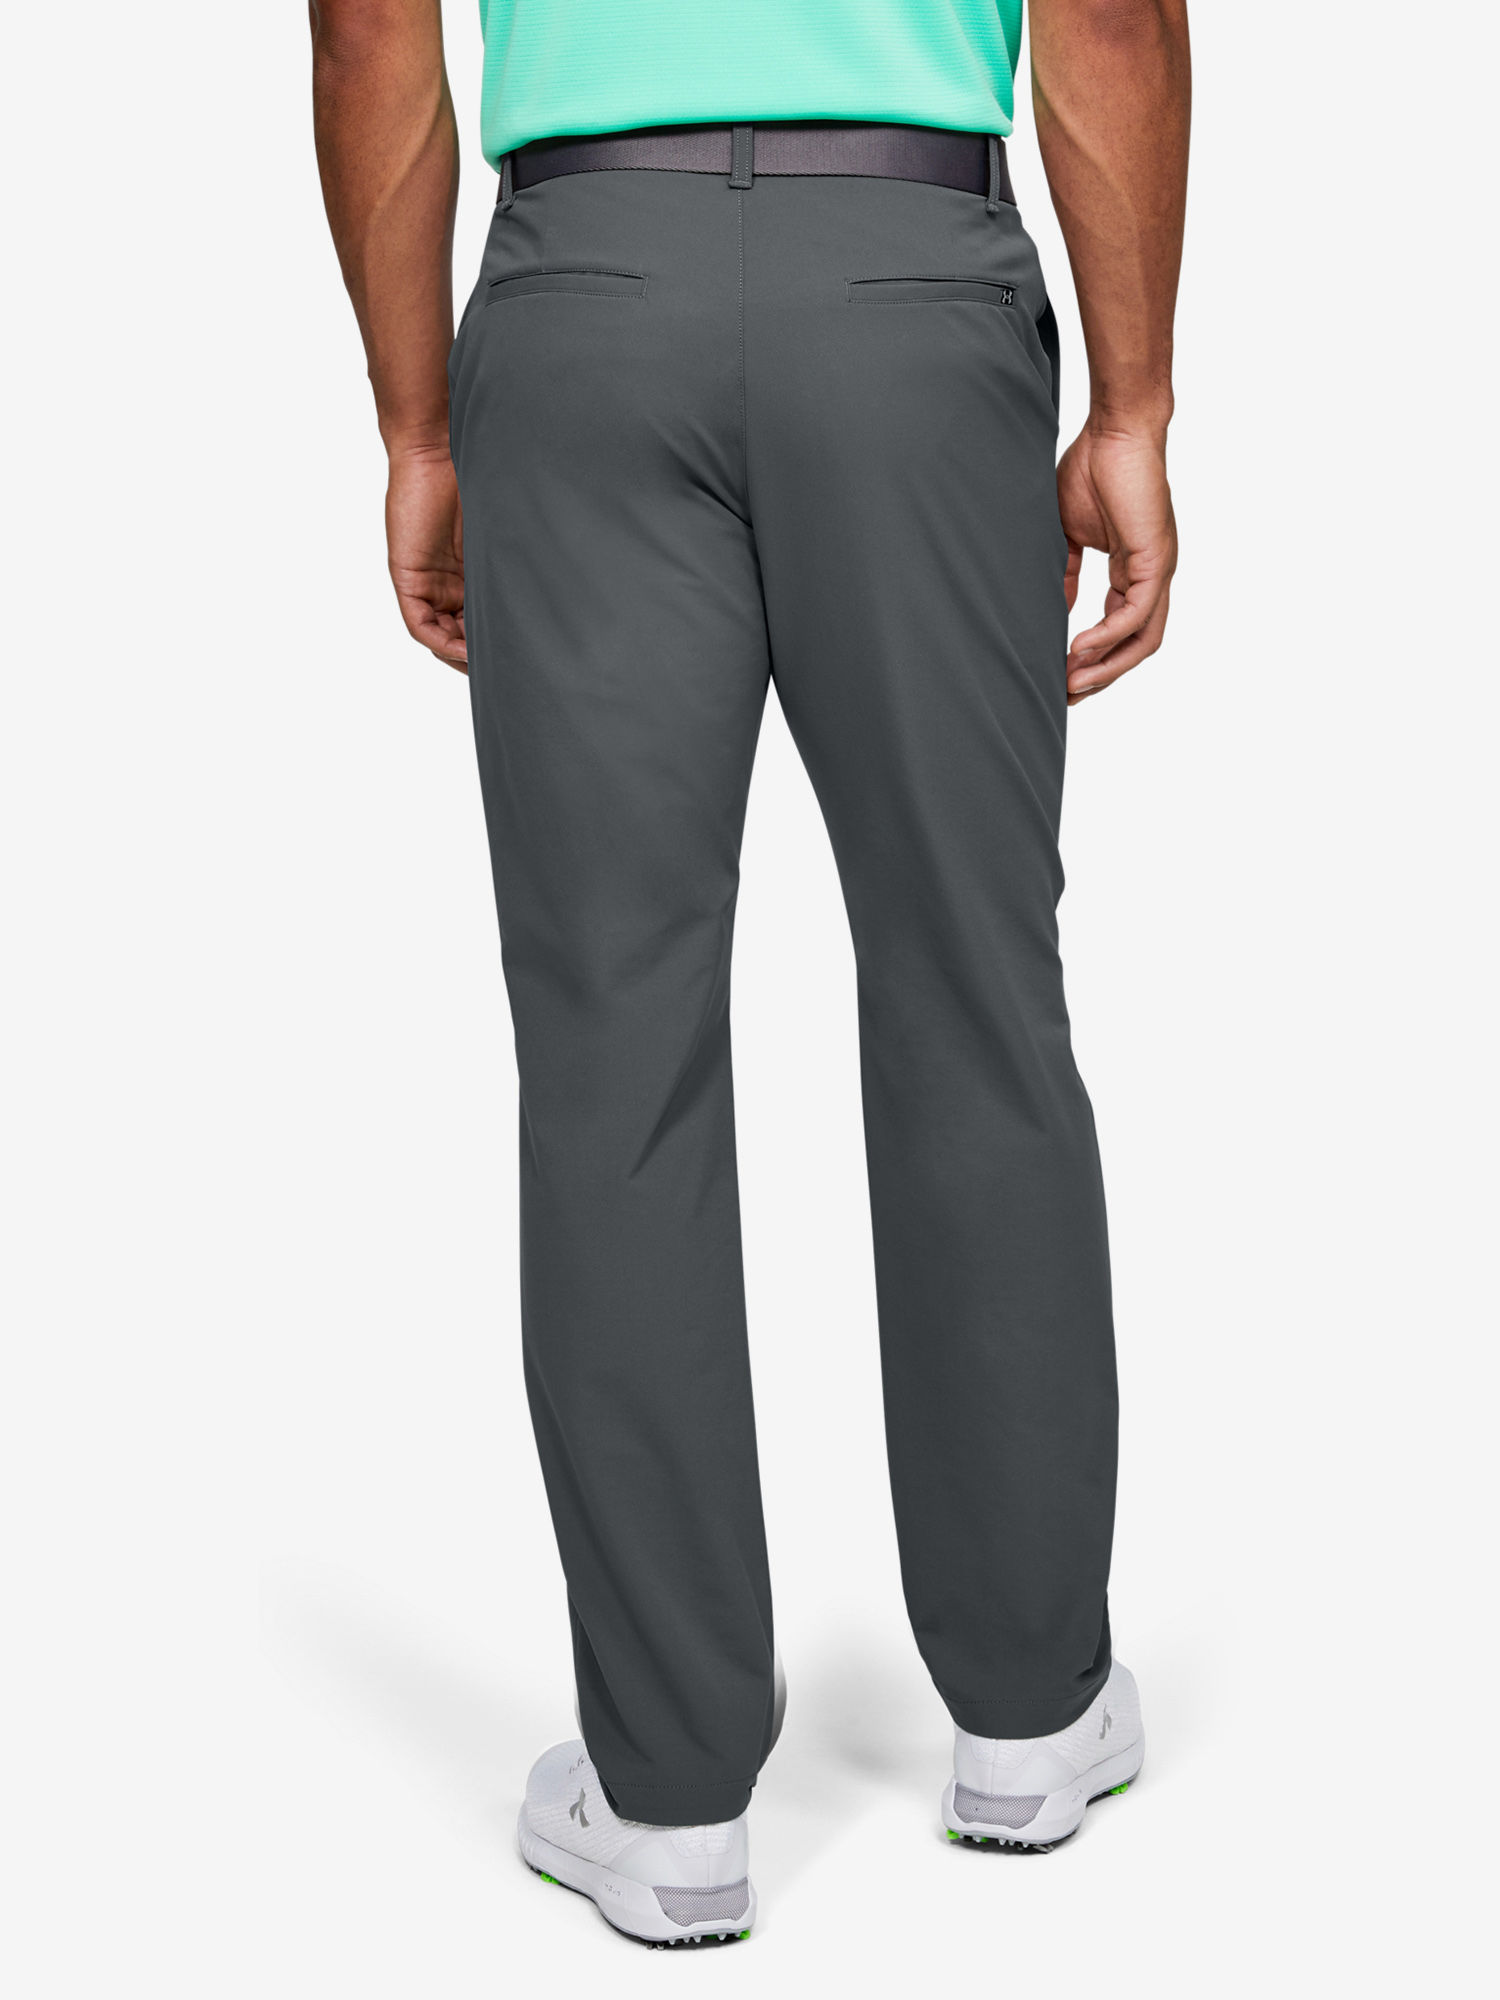 Nohavice Under Armour Tech Pant-GRY (2)